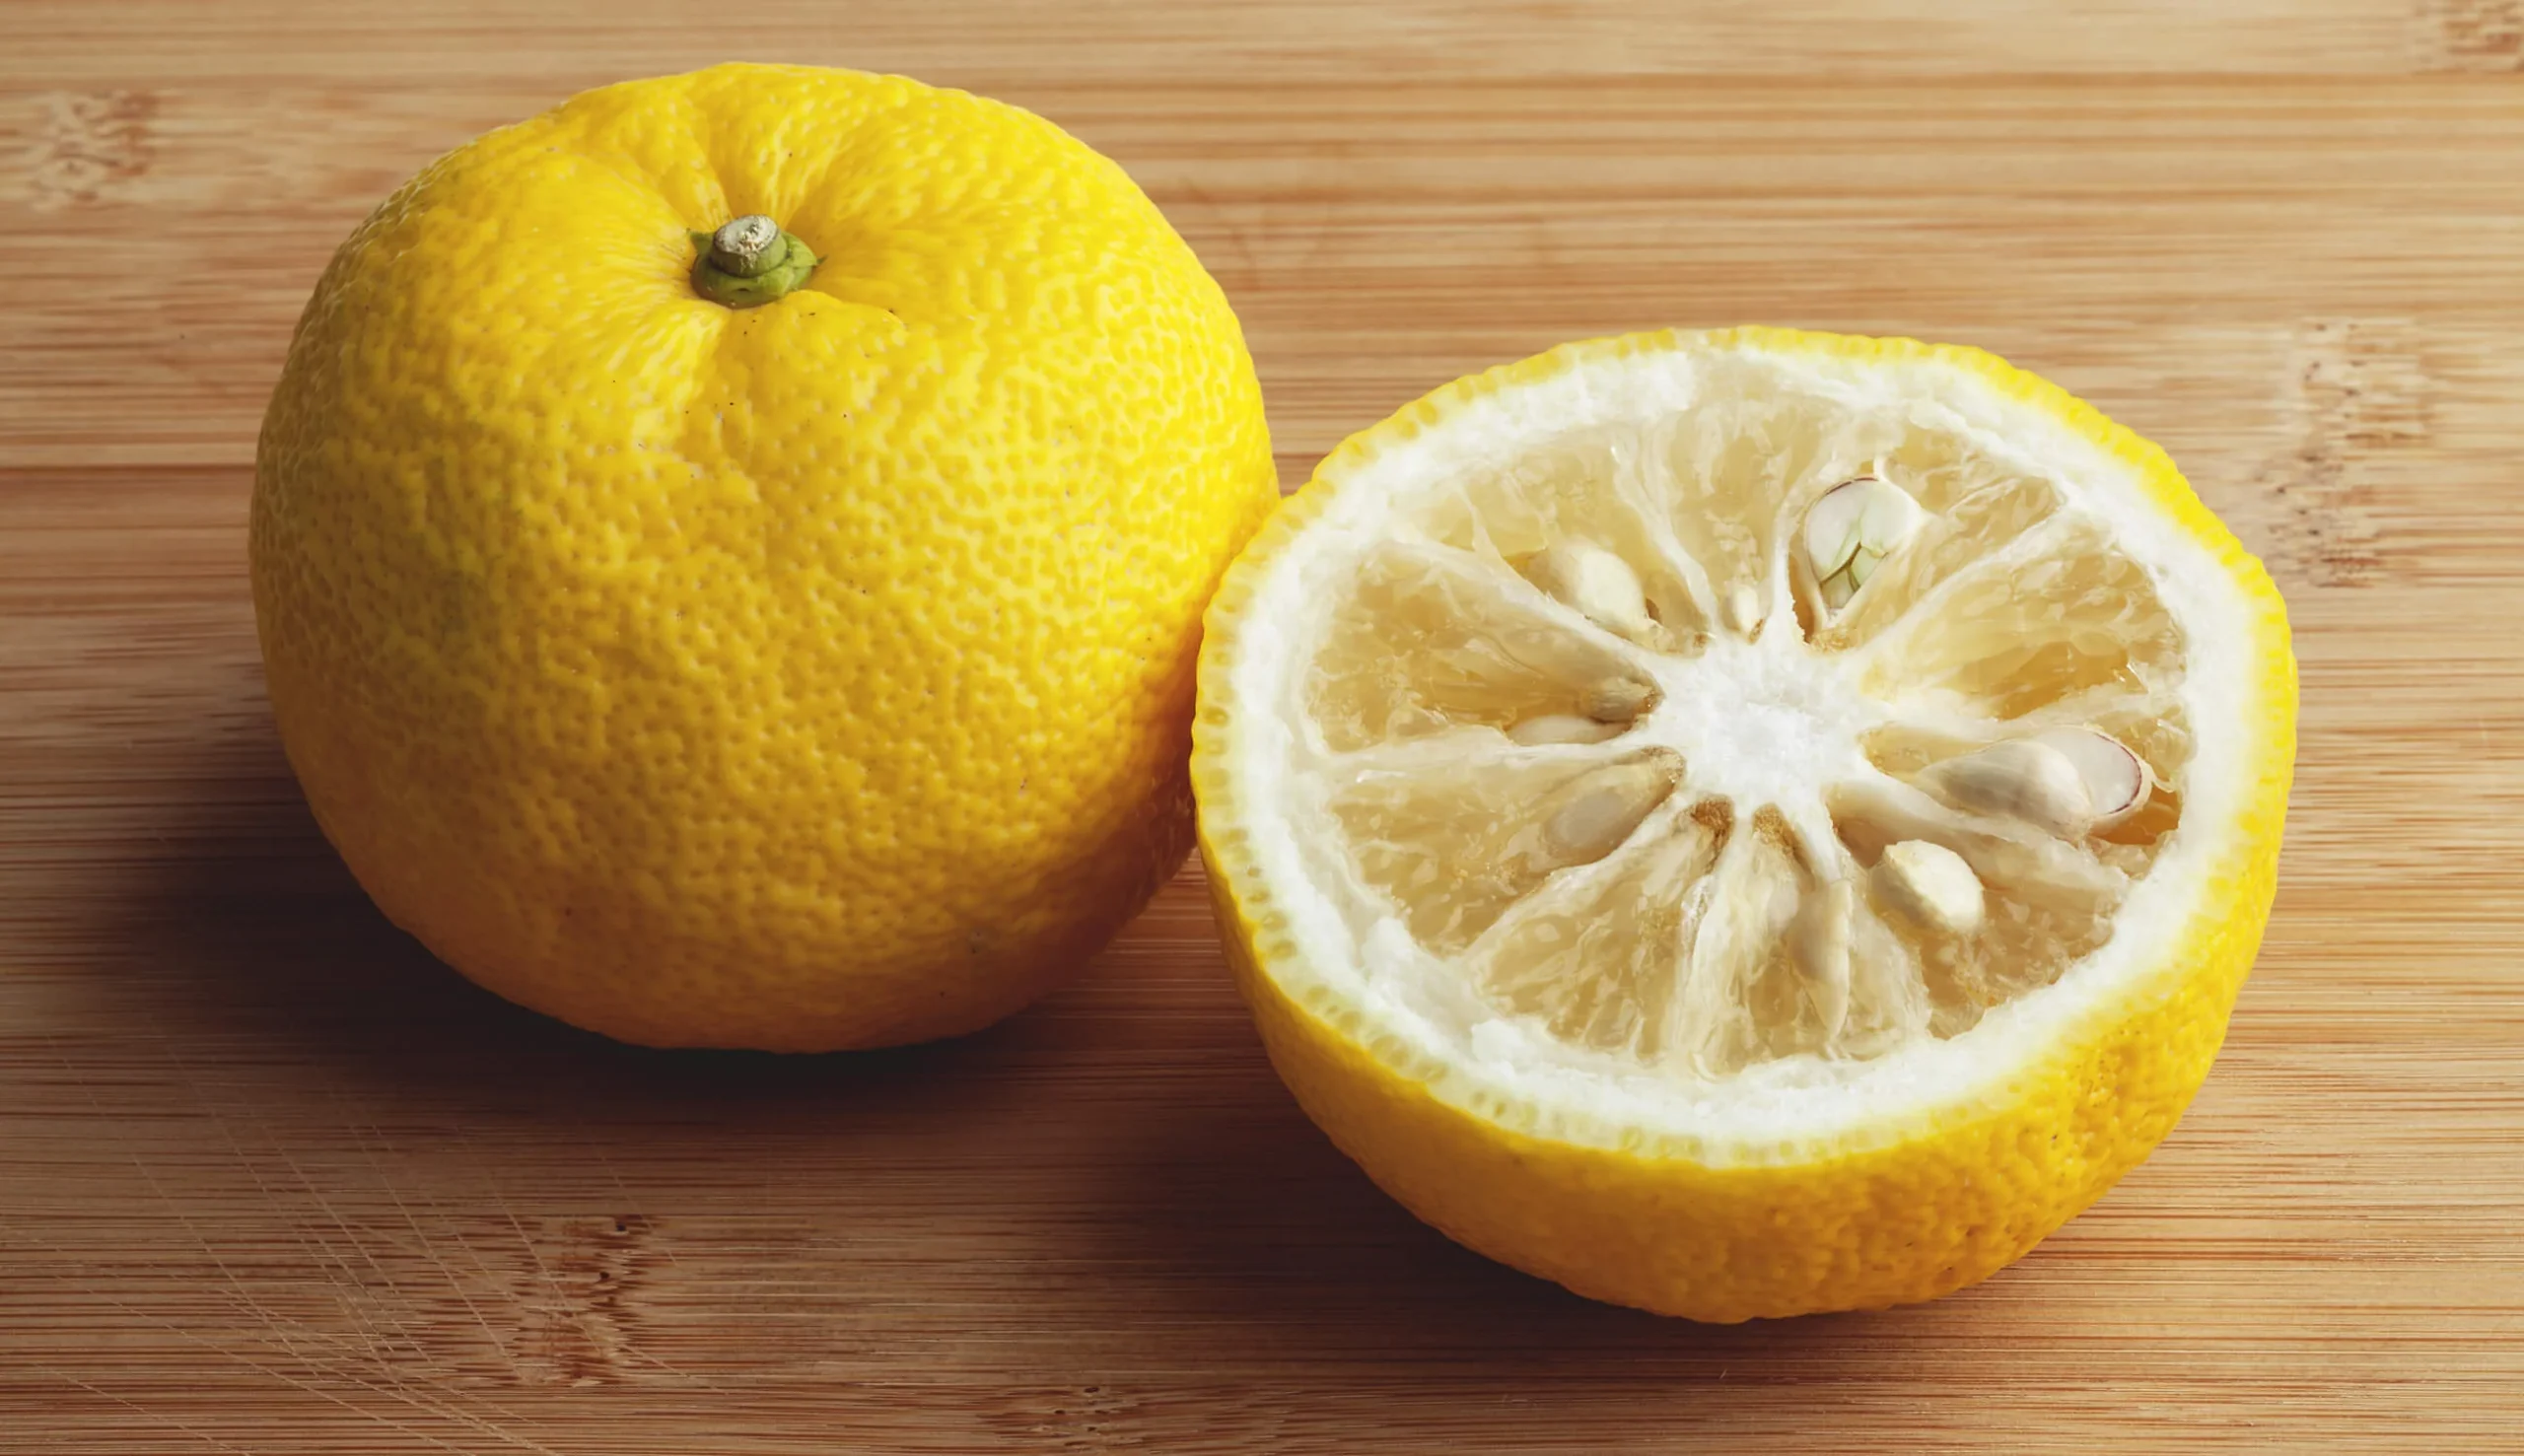 Yuzu – Here's Why This Skincare Ingredient Deserves Your Attention